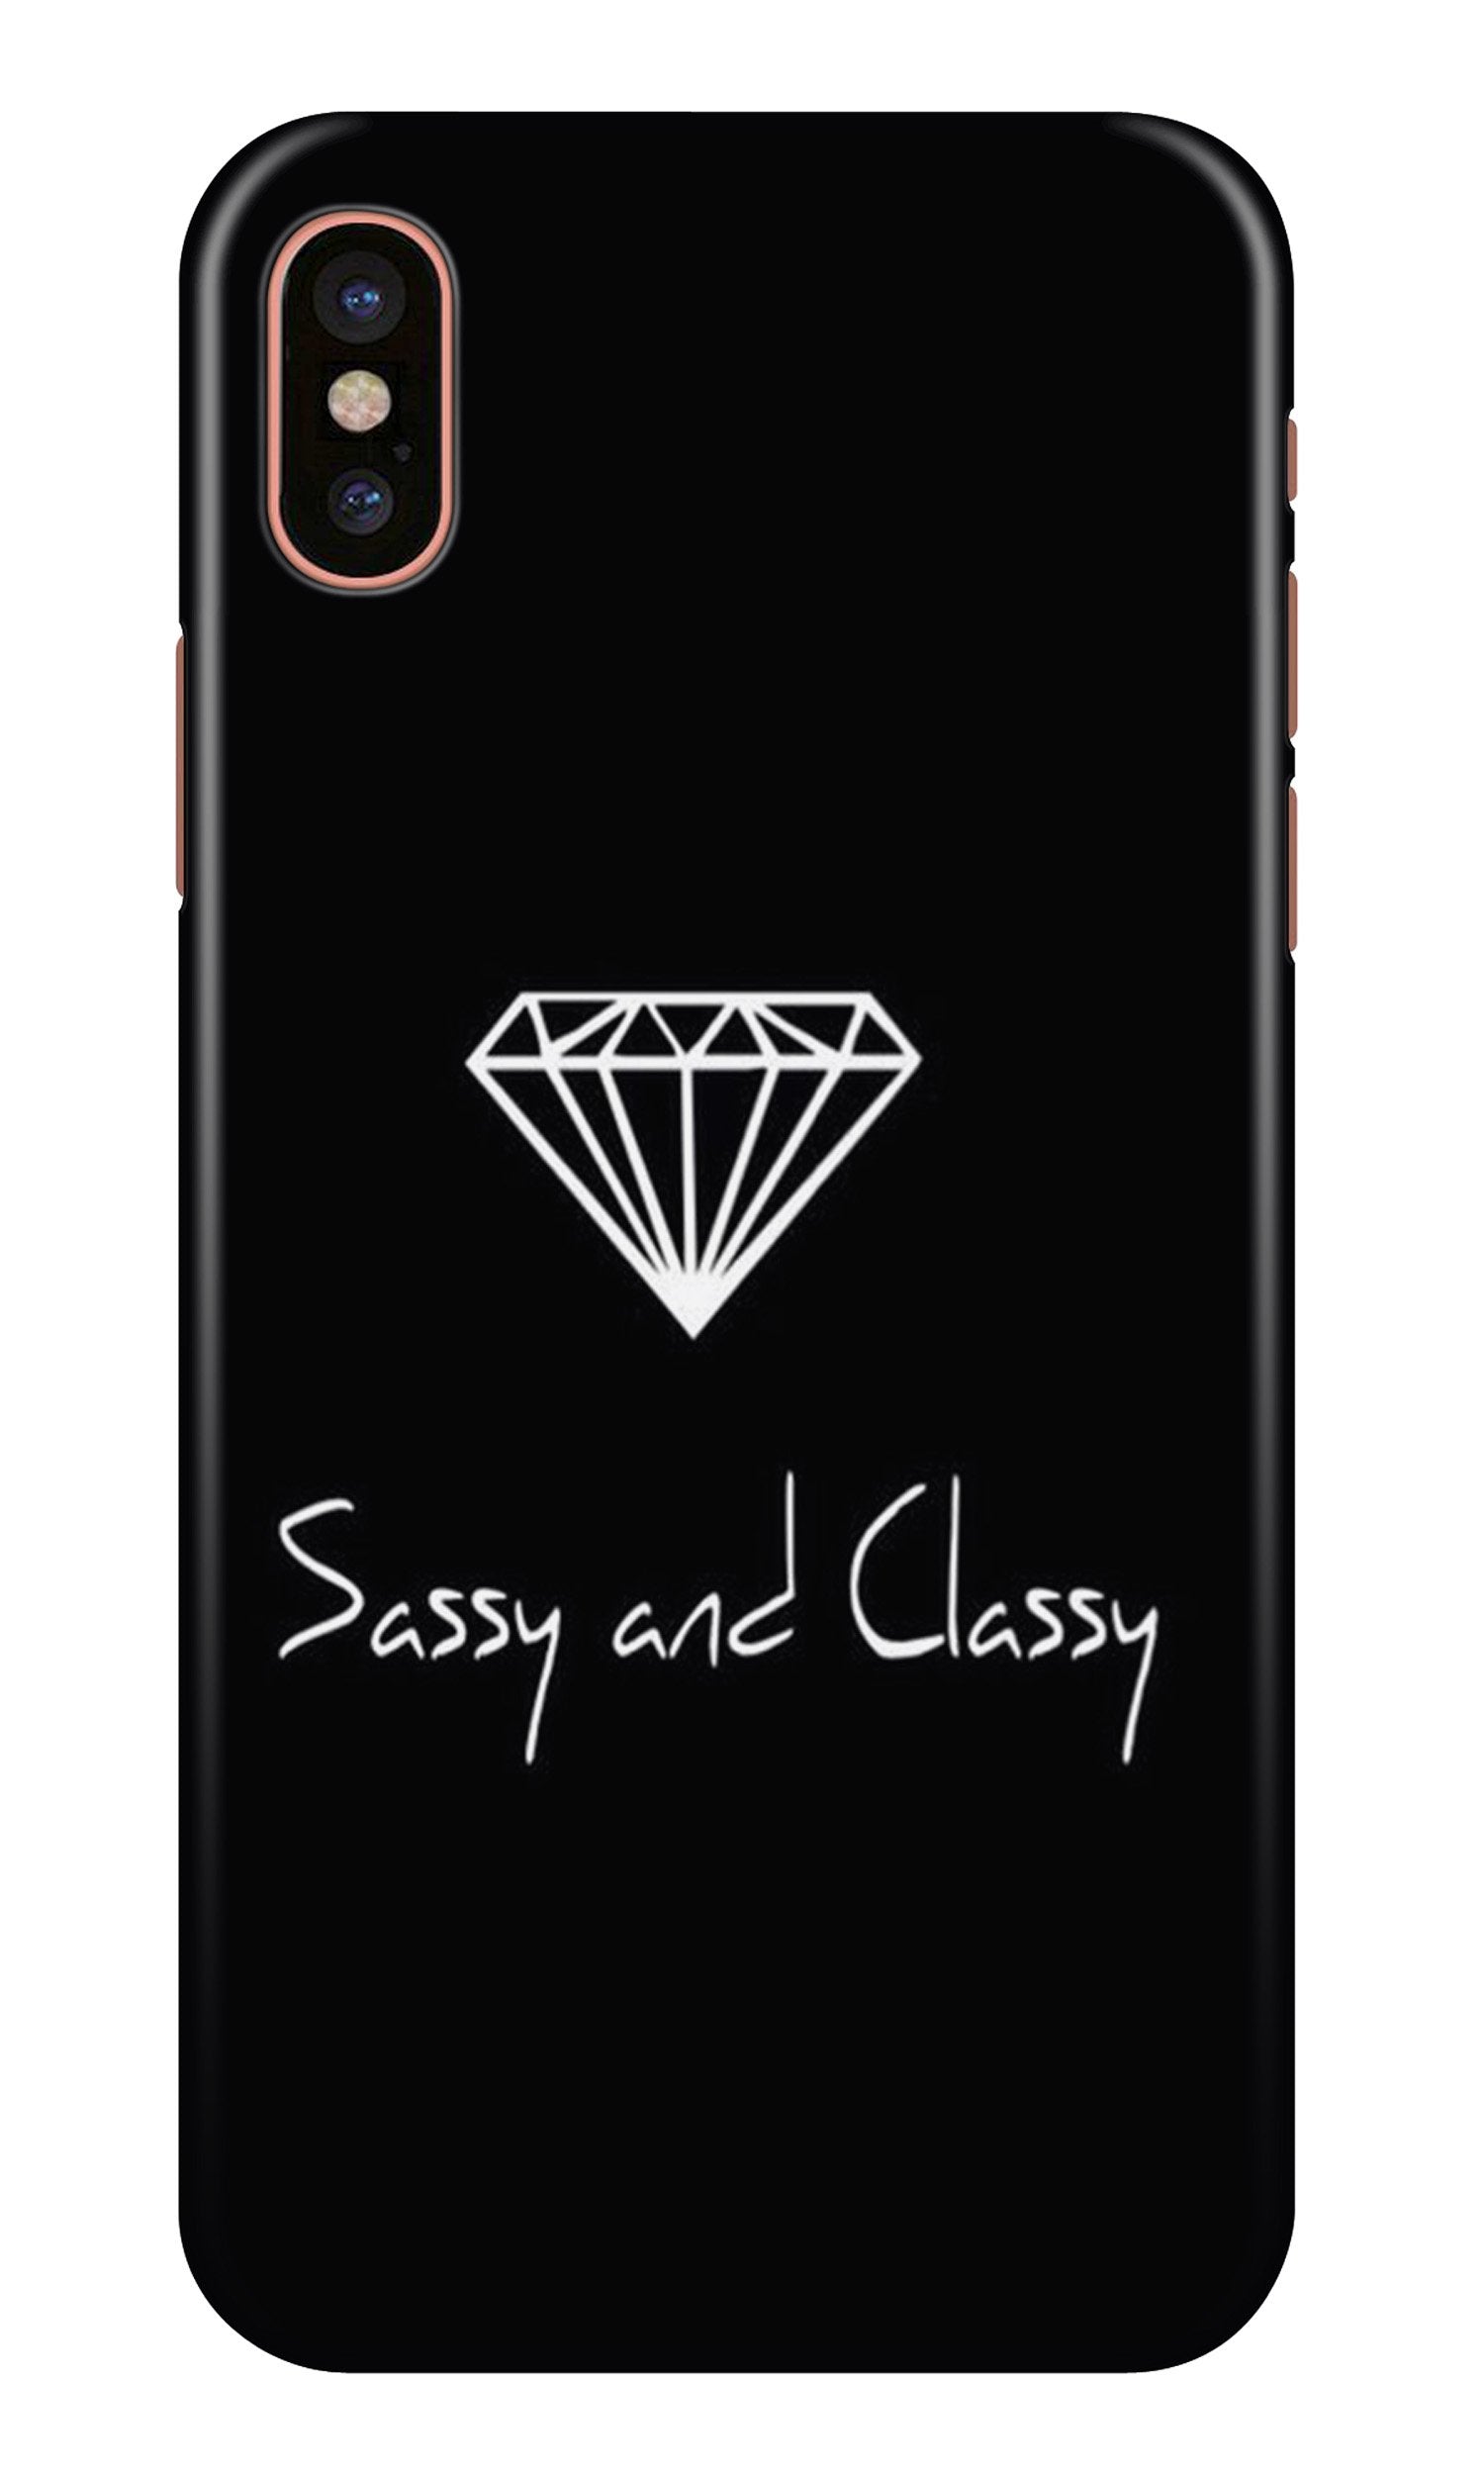 Sassy and Classy Case for iPhone X (Design No. 264)